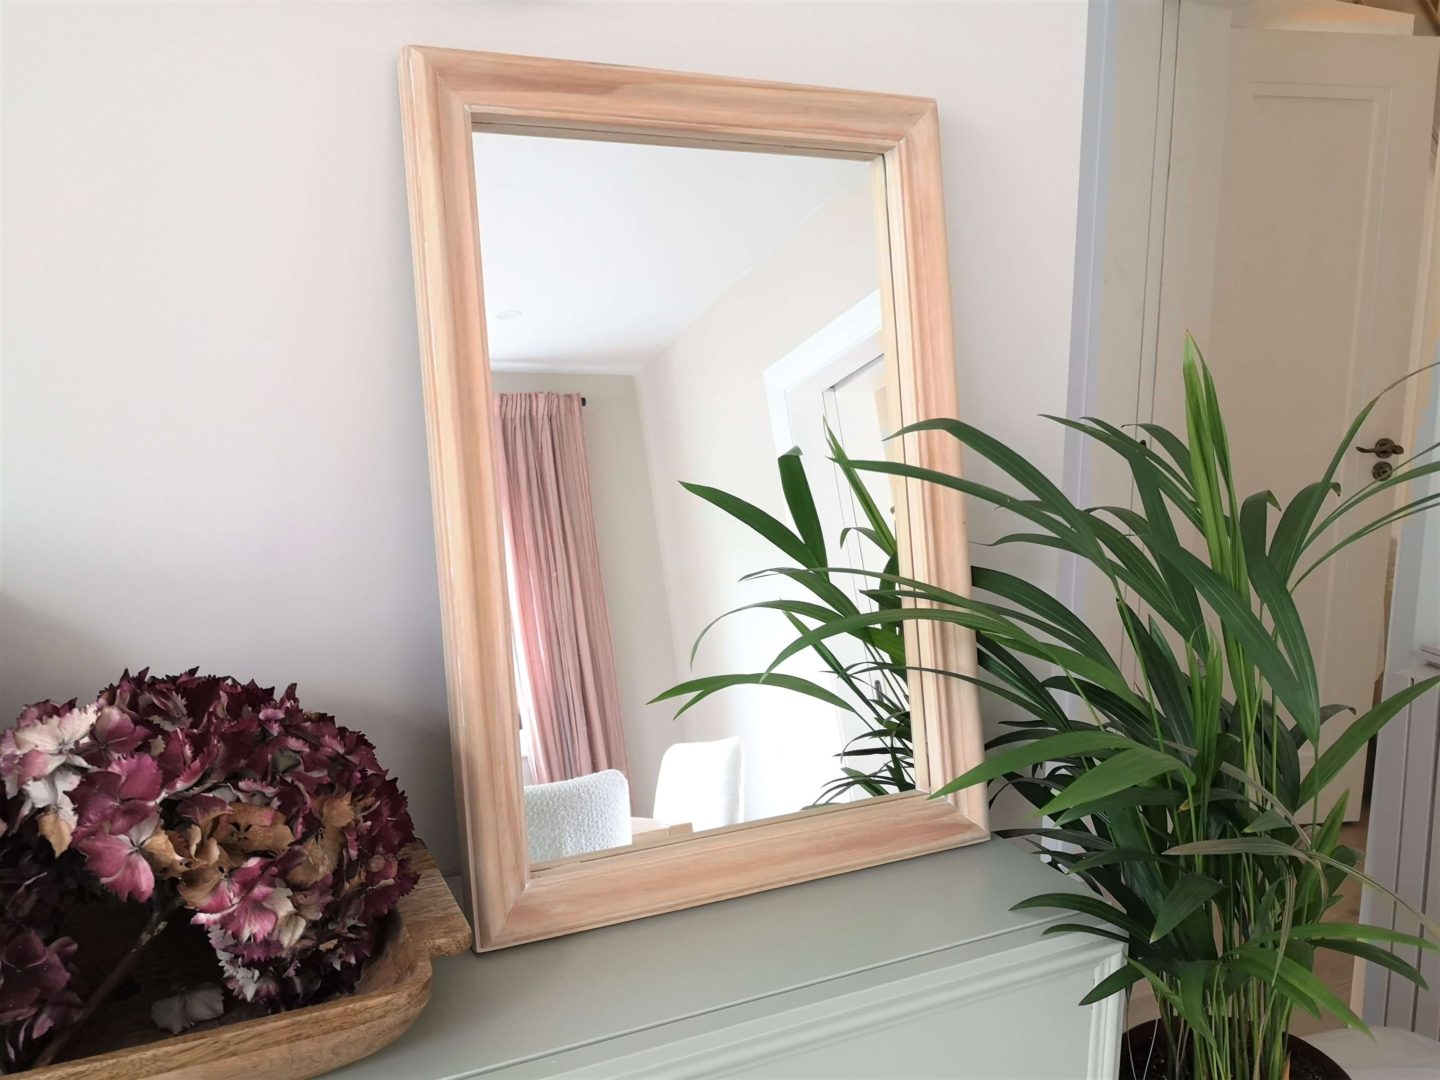 A BATHROOM MIRROR UPDATE, PLUS A FEW OF MY FAVOURITE SMALL MIRRORS!